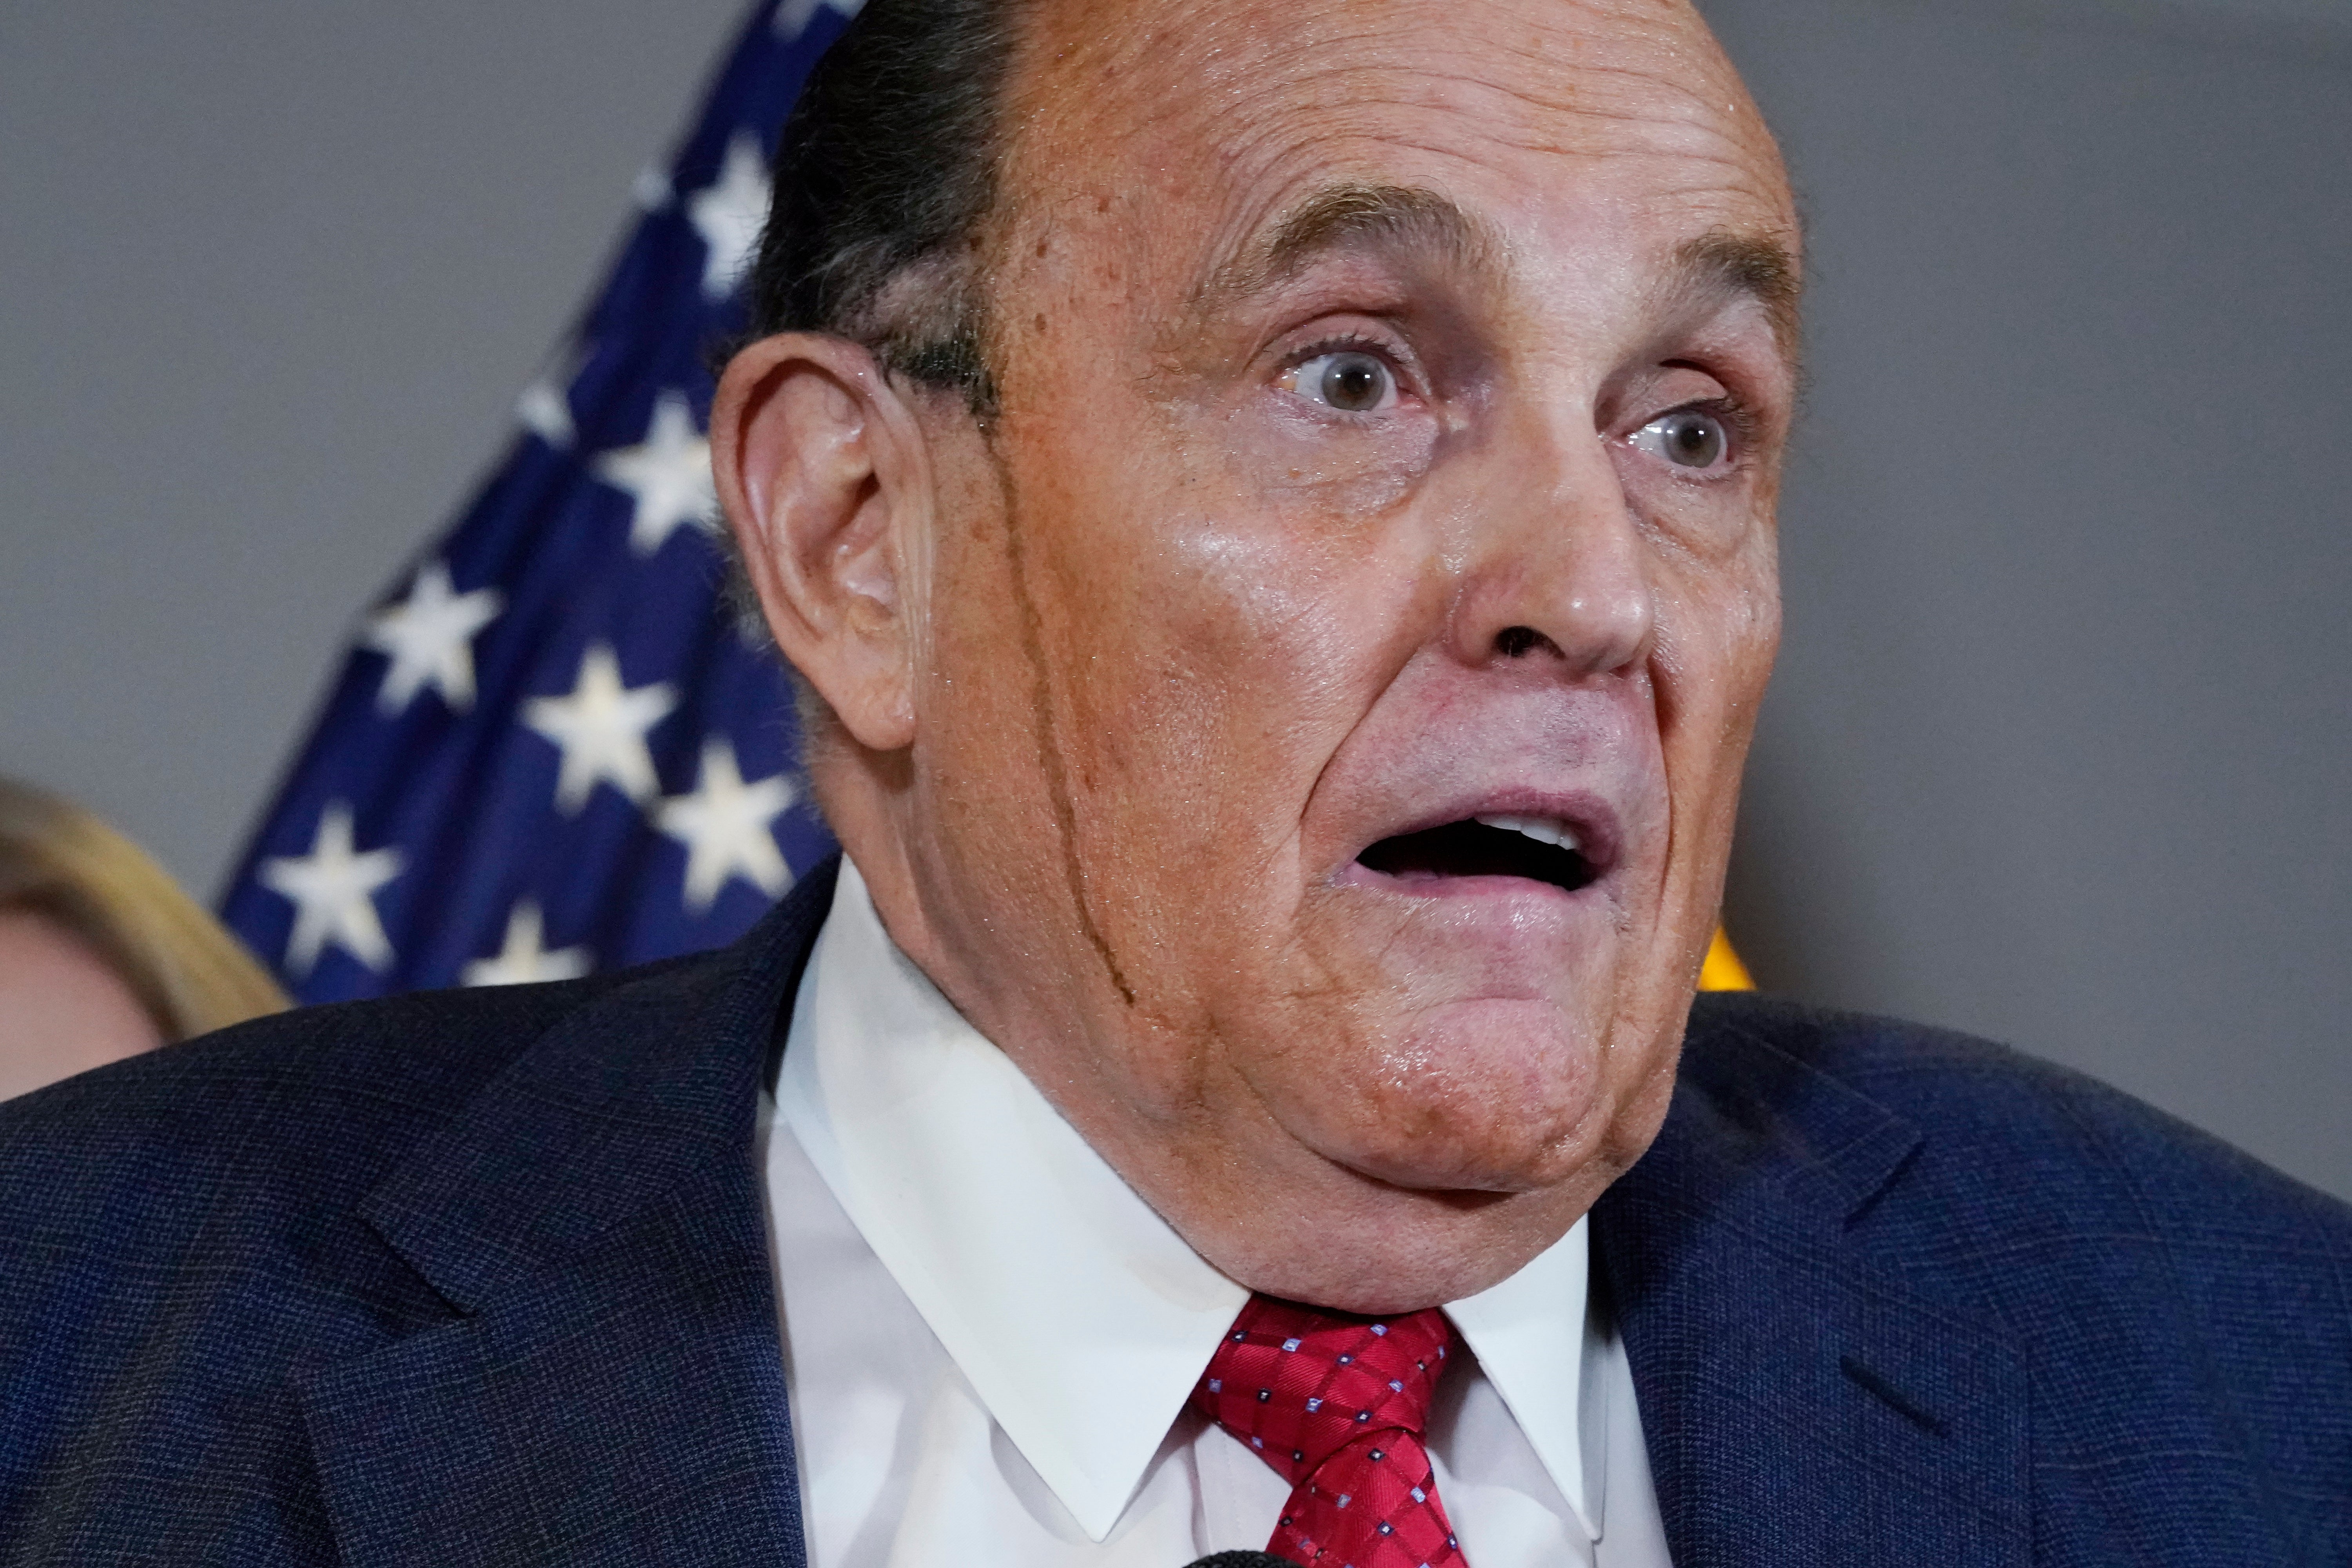 Rudy Giuliani is receiving a reported $20k a day